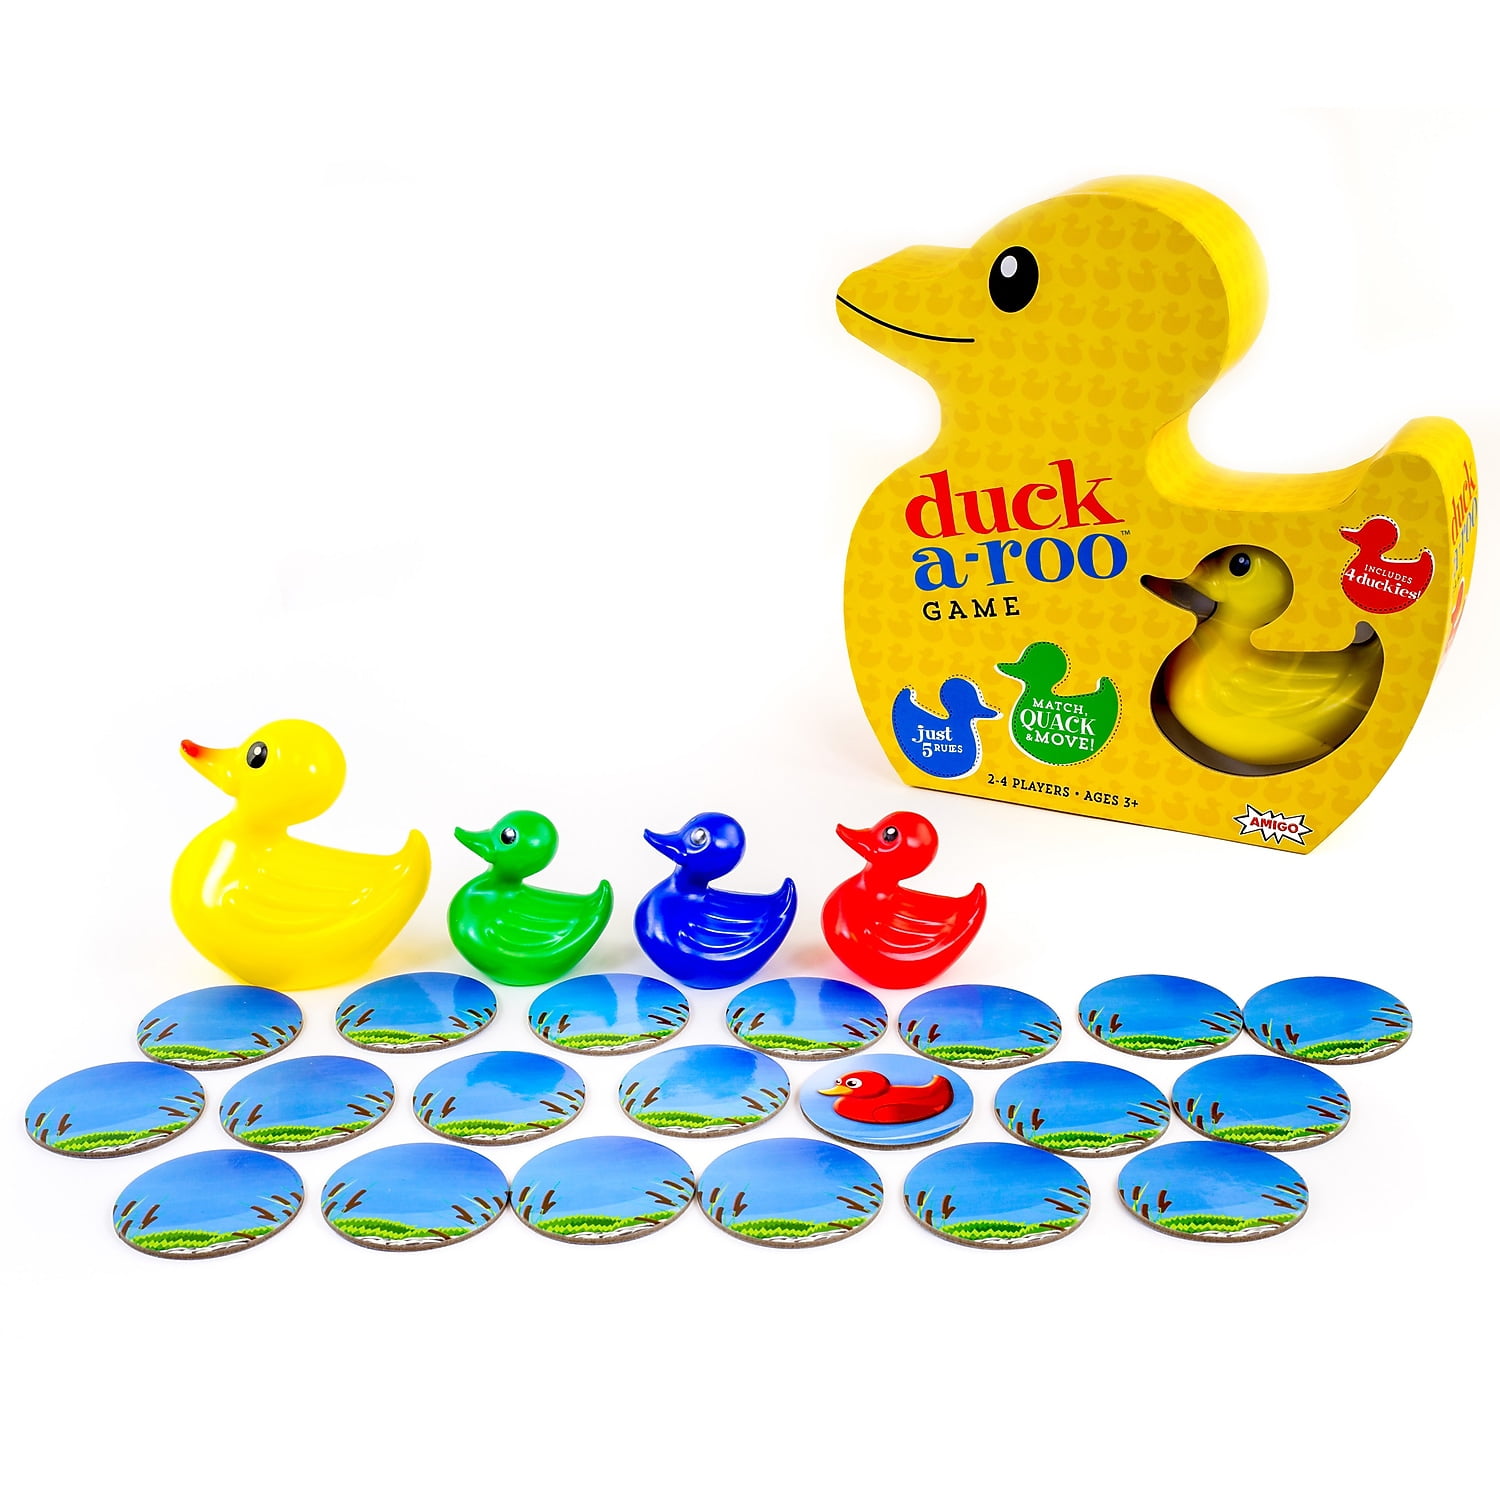 Unblocked Duck Life 5: A Quacking Adventure for School and Office